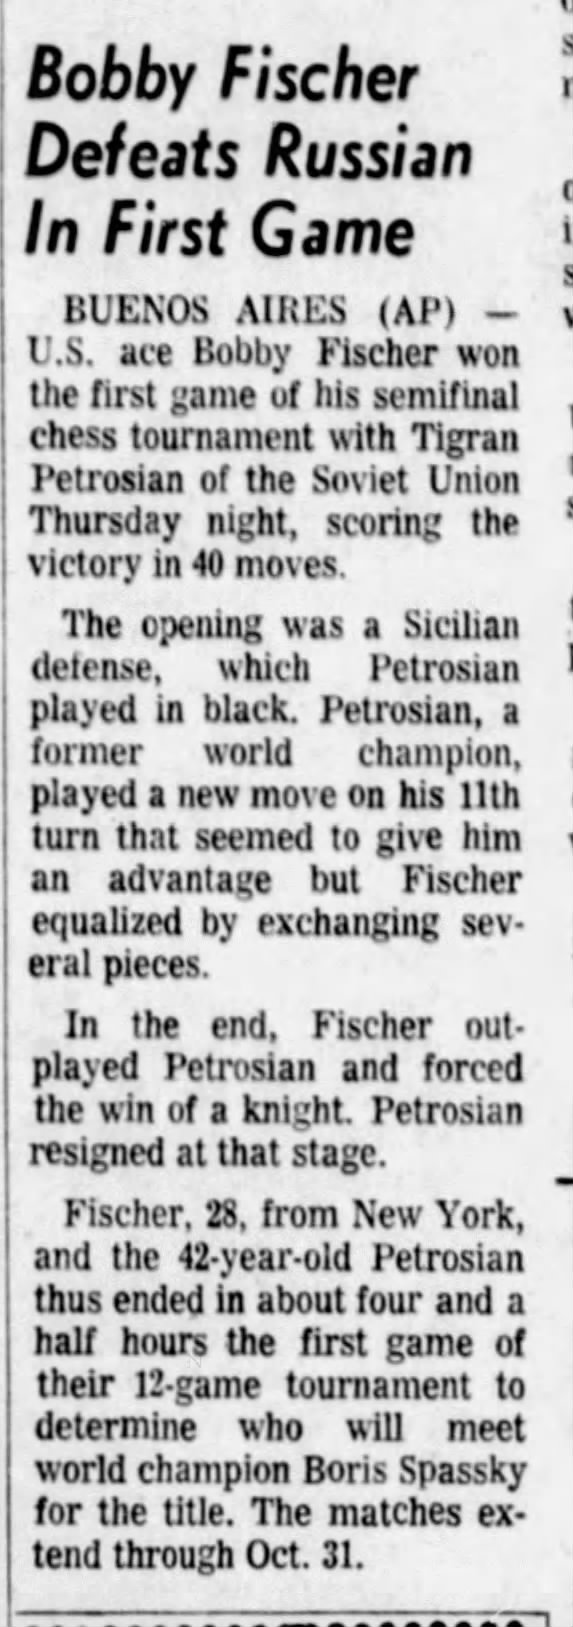 Bobby Fischer Defeats Russian in First Game